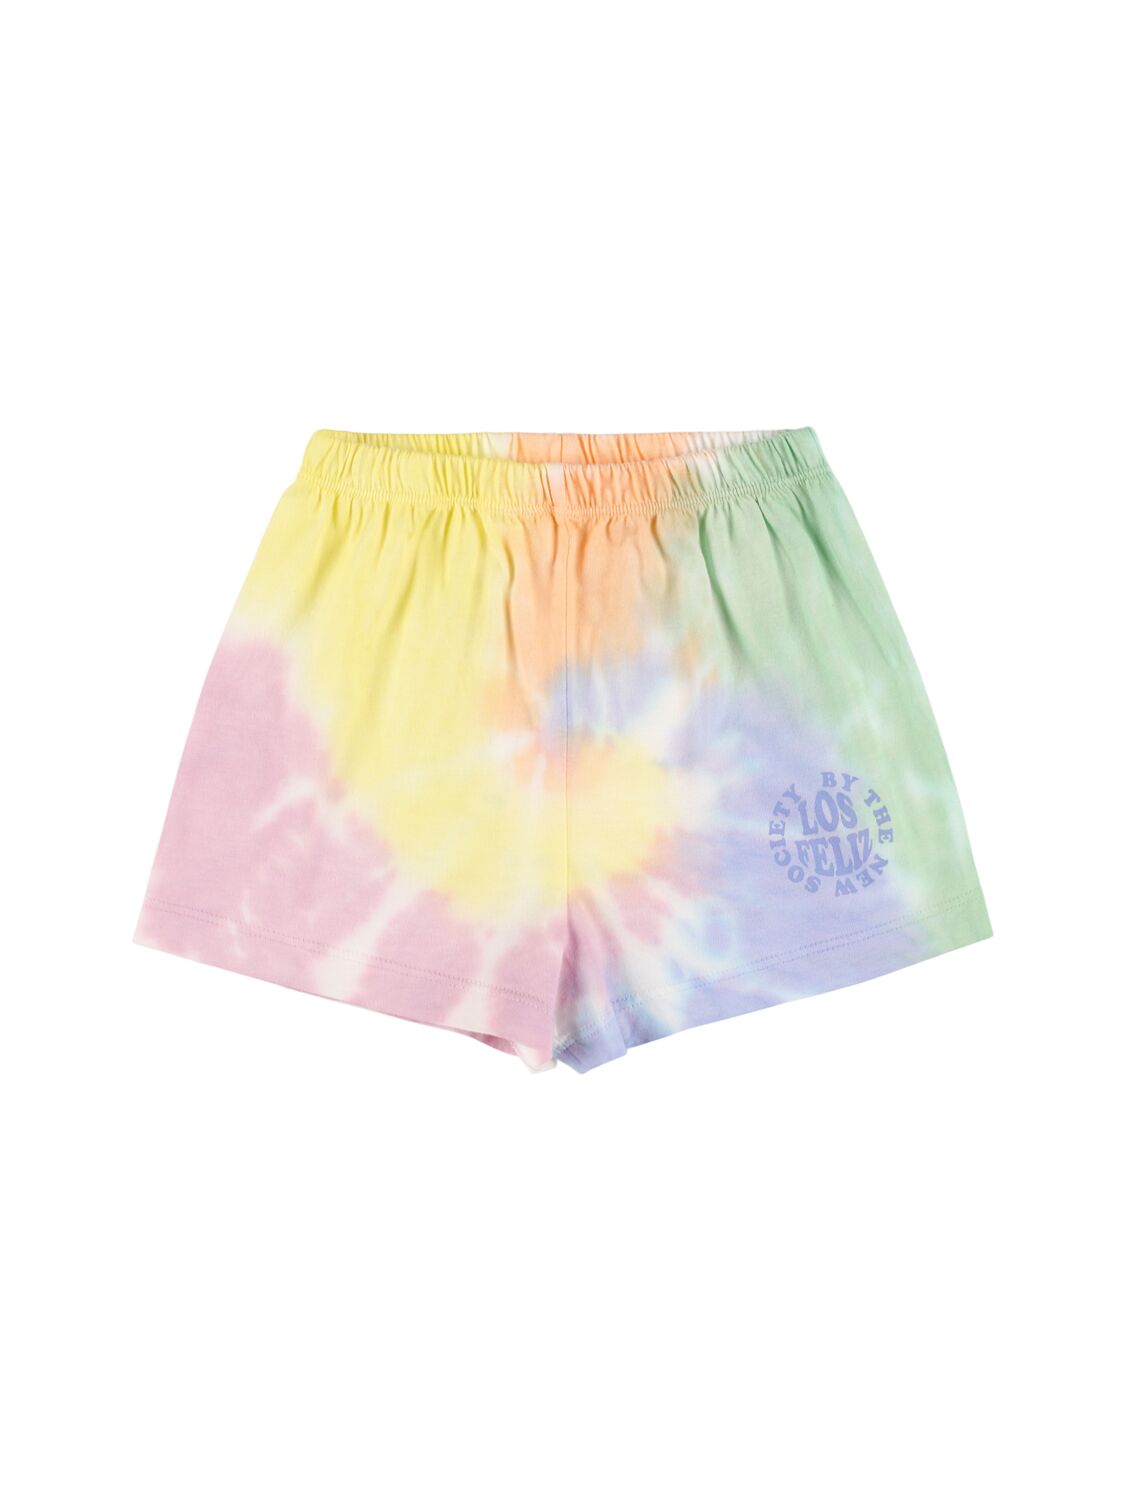 The New Society Kids' Cotton Sweat Shorts In Multicolor